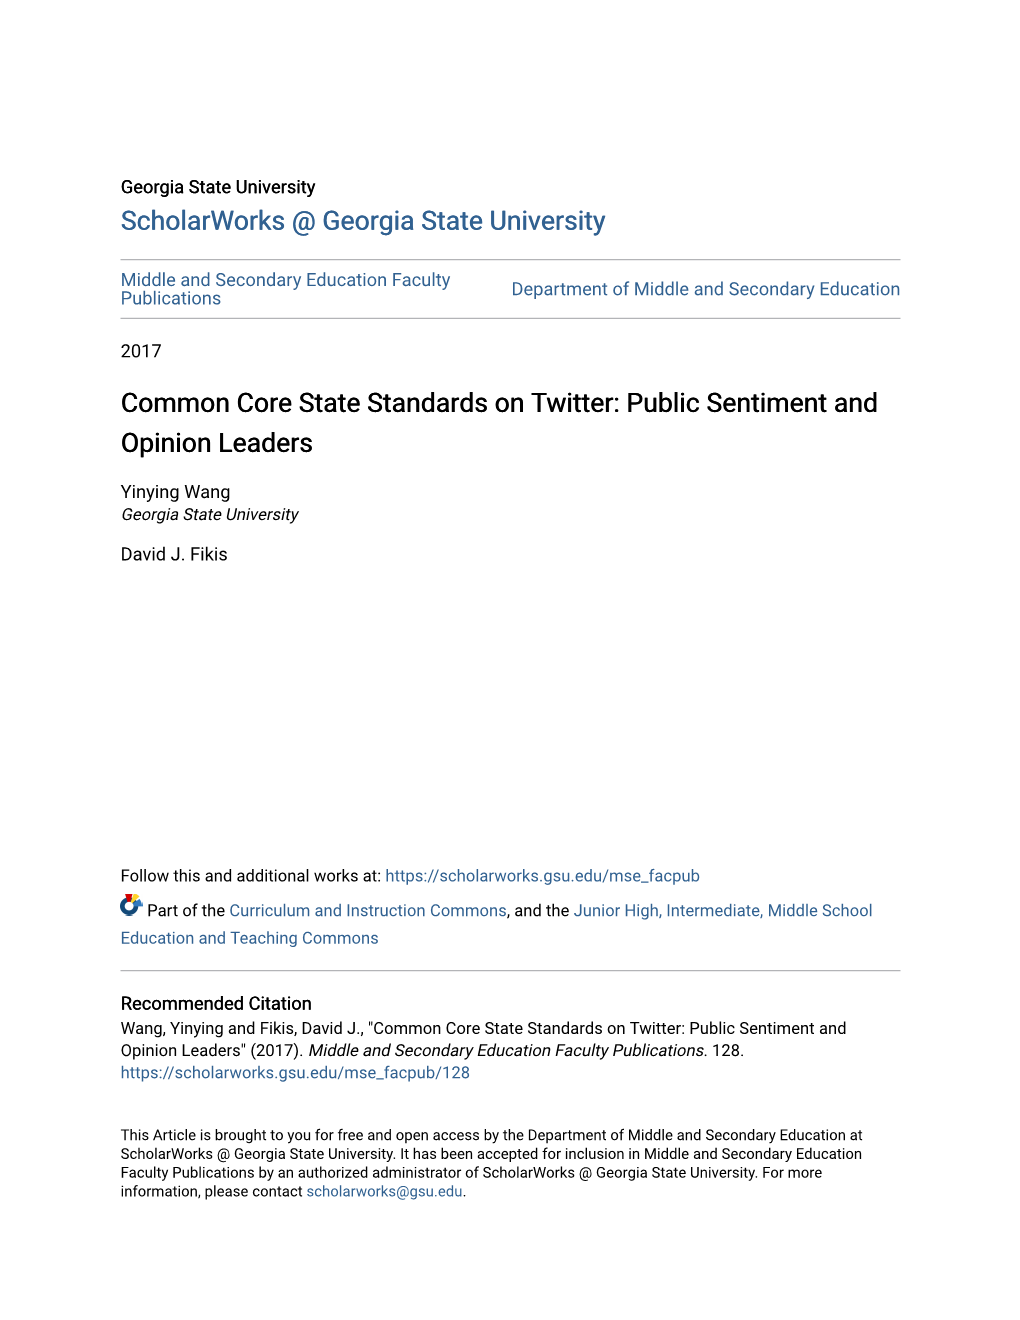 Common Core State Standards on Twitter: Public Sentiment and Opinion Leaders